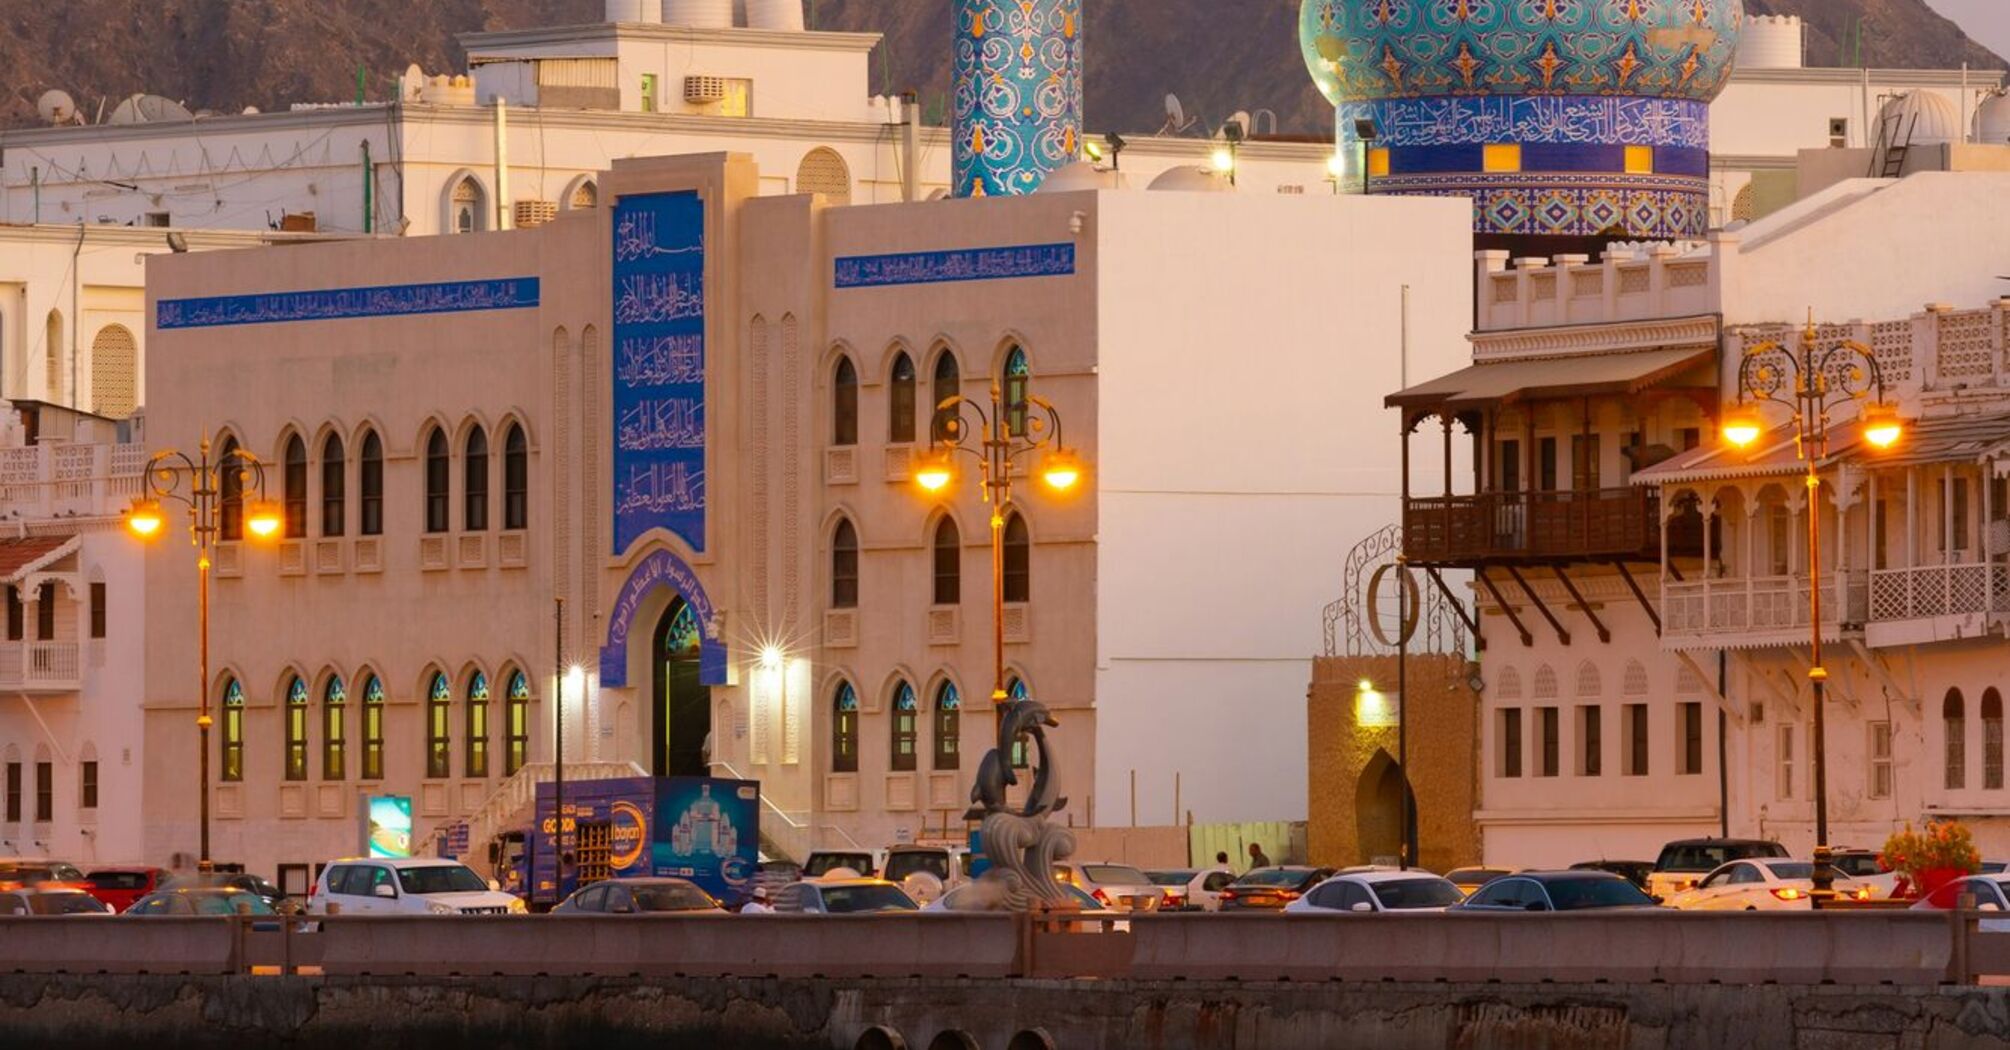 A picturesque view of a vibrant blue and gold mosque with a dome